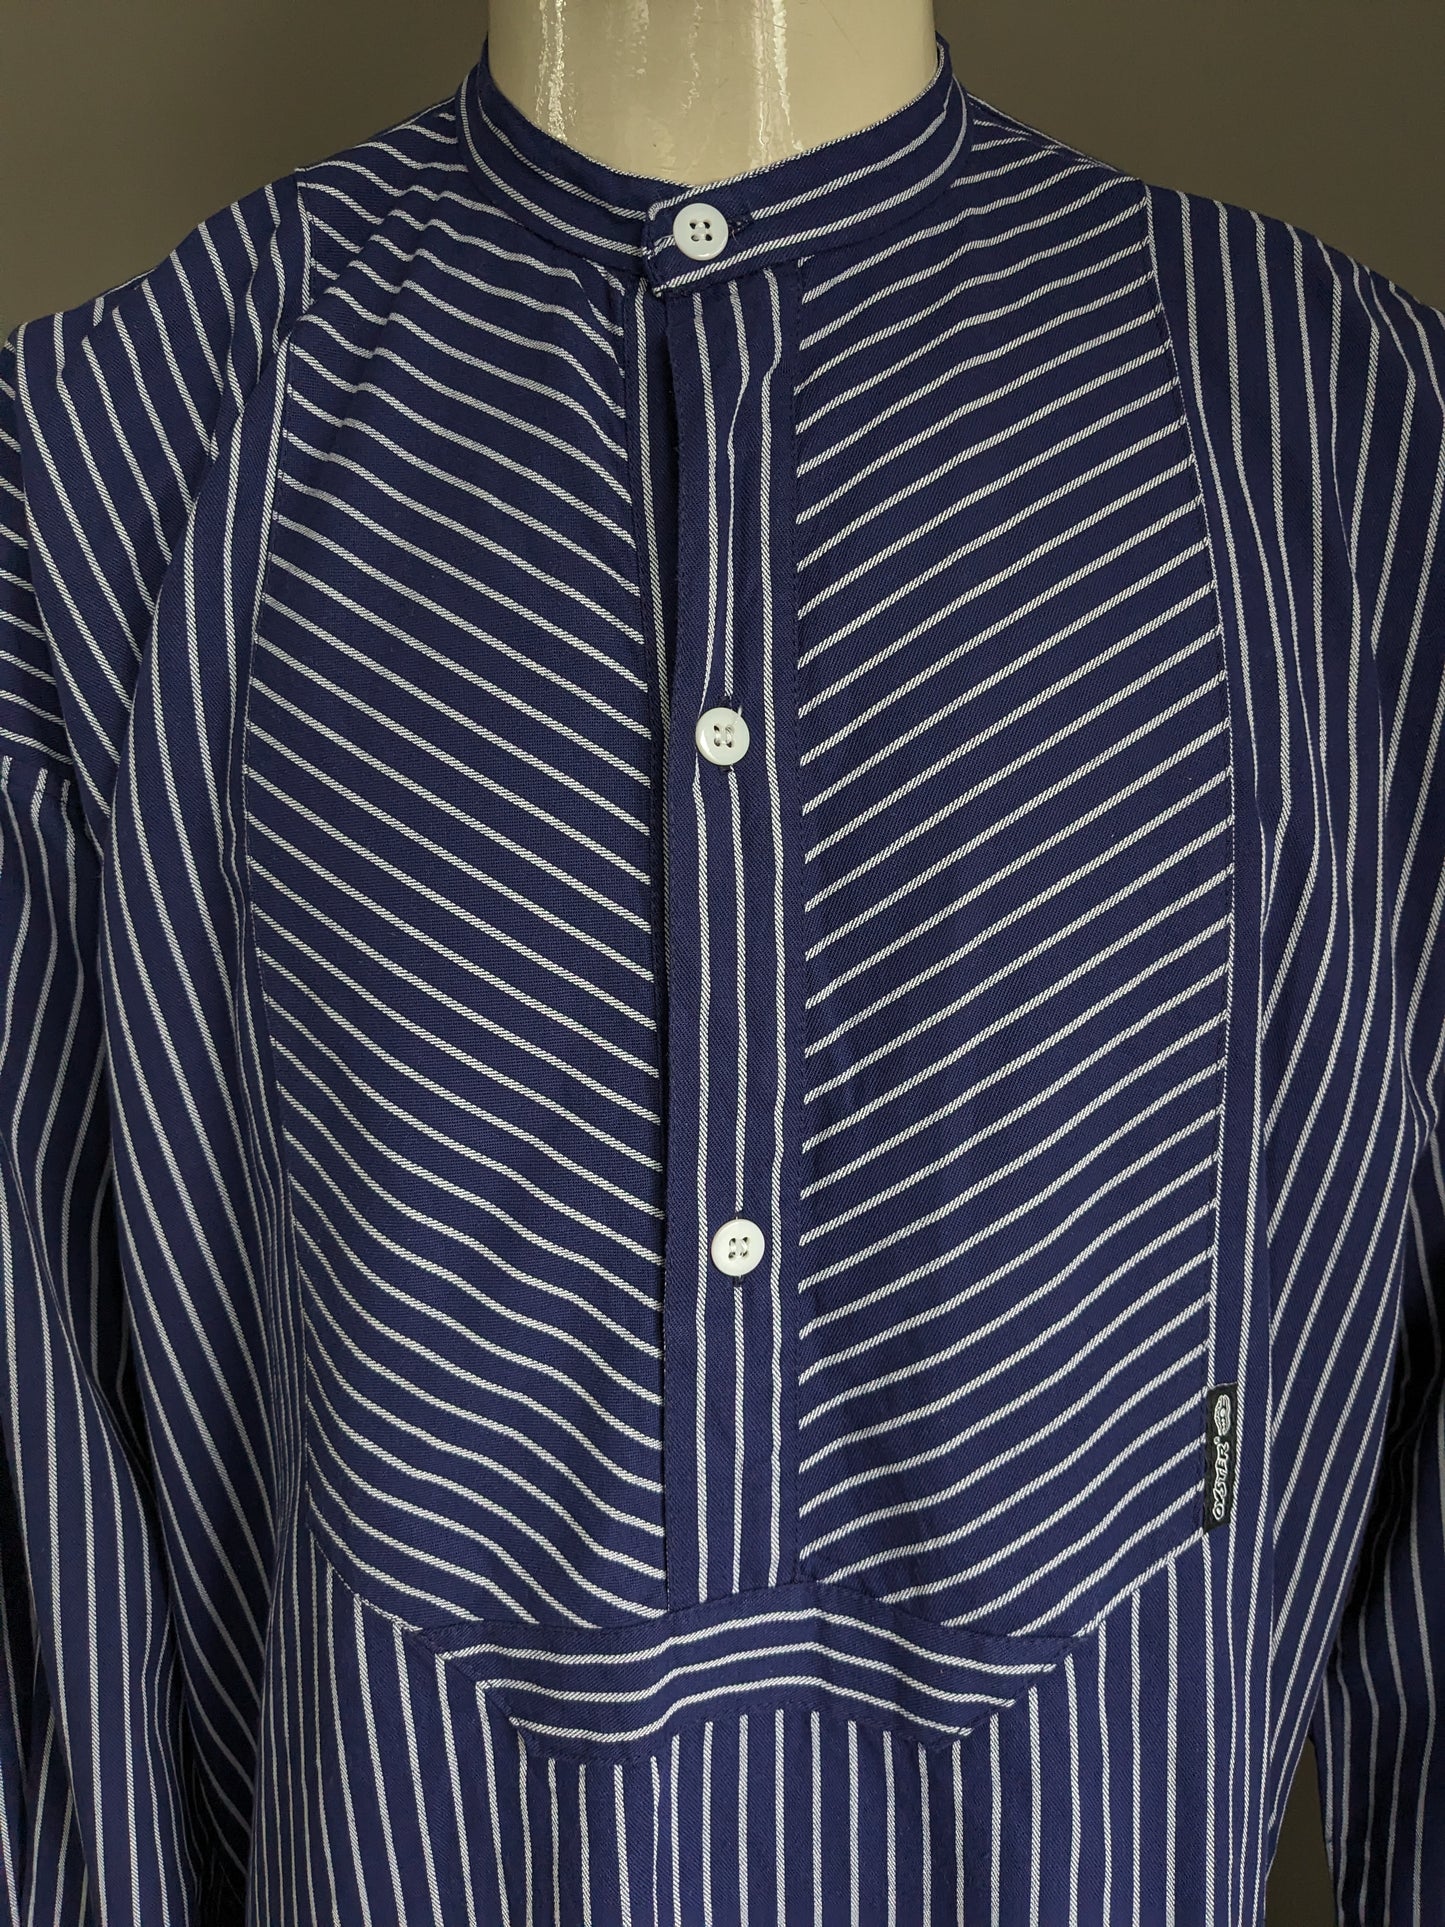 Vintage Duster polo sweater / shirt with raised / farmers / mao collar. Blue white striped. Size XXL / 2XL